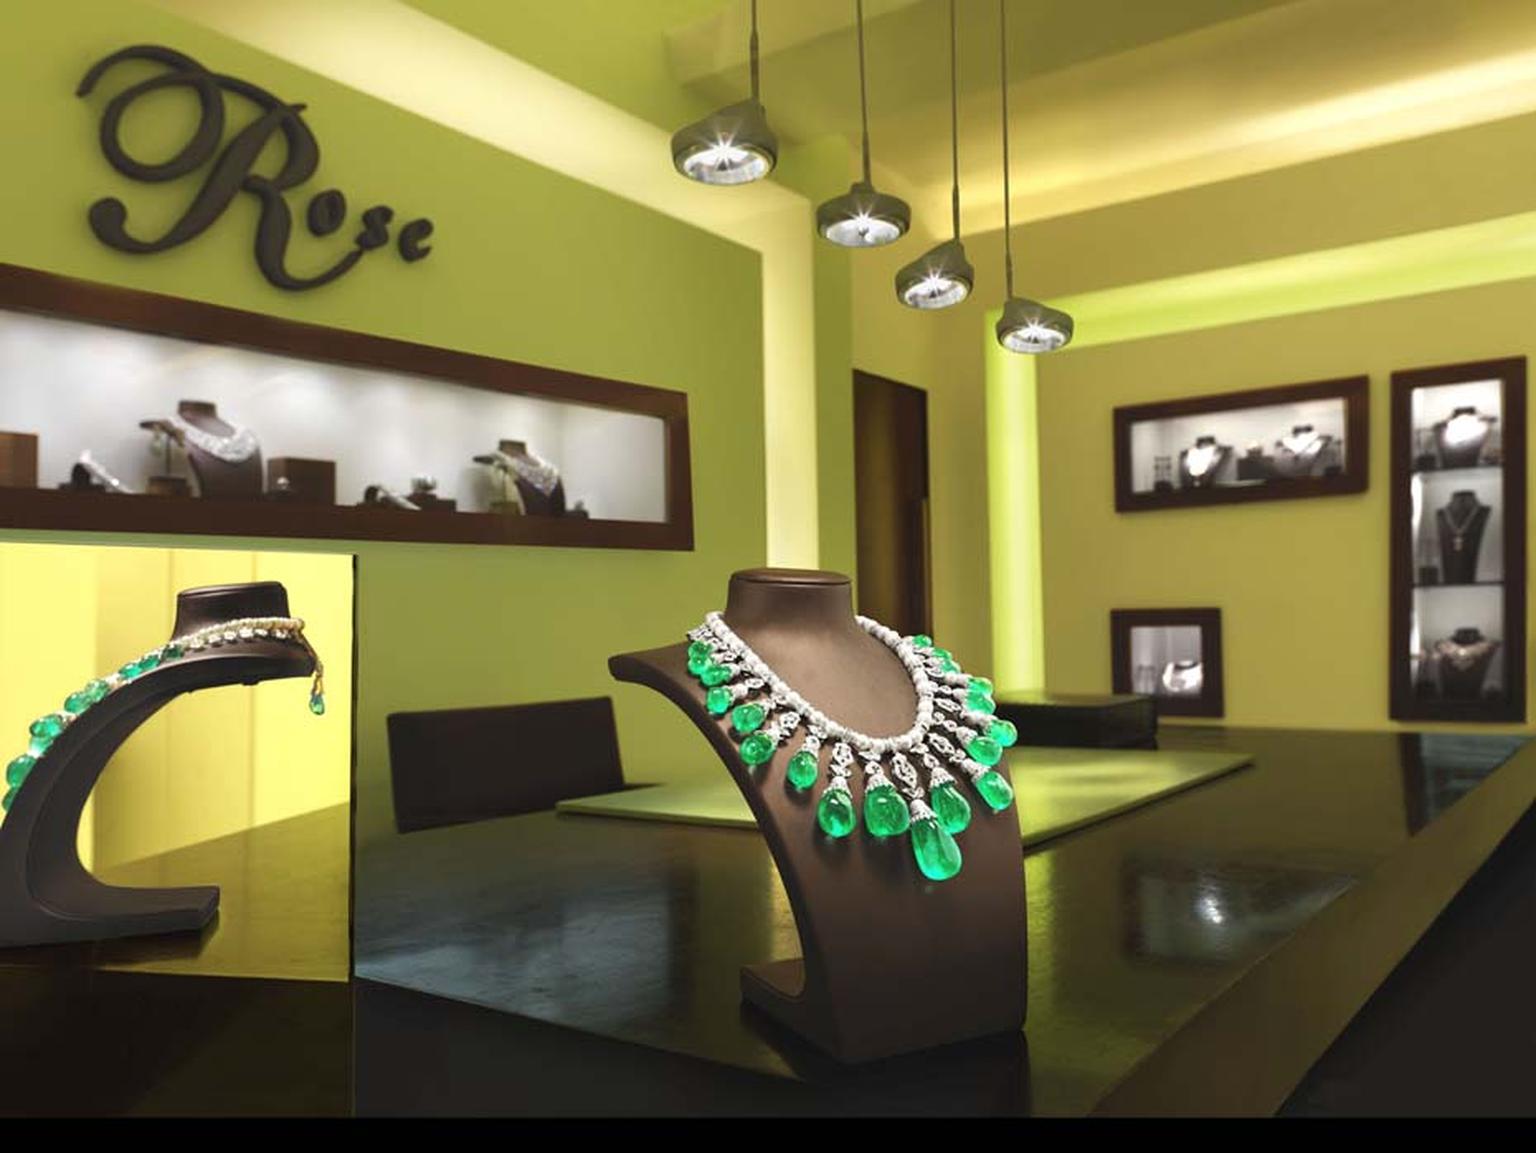 The House of Rose’s La Reina necklace - "The Queen" in Spanish - on display in one of the Indian jeweller's boutiques